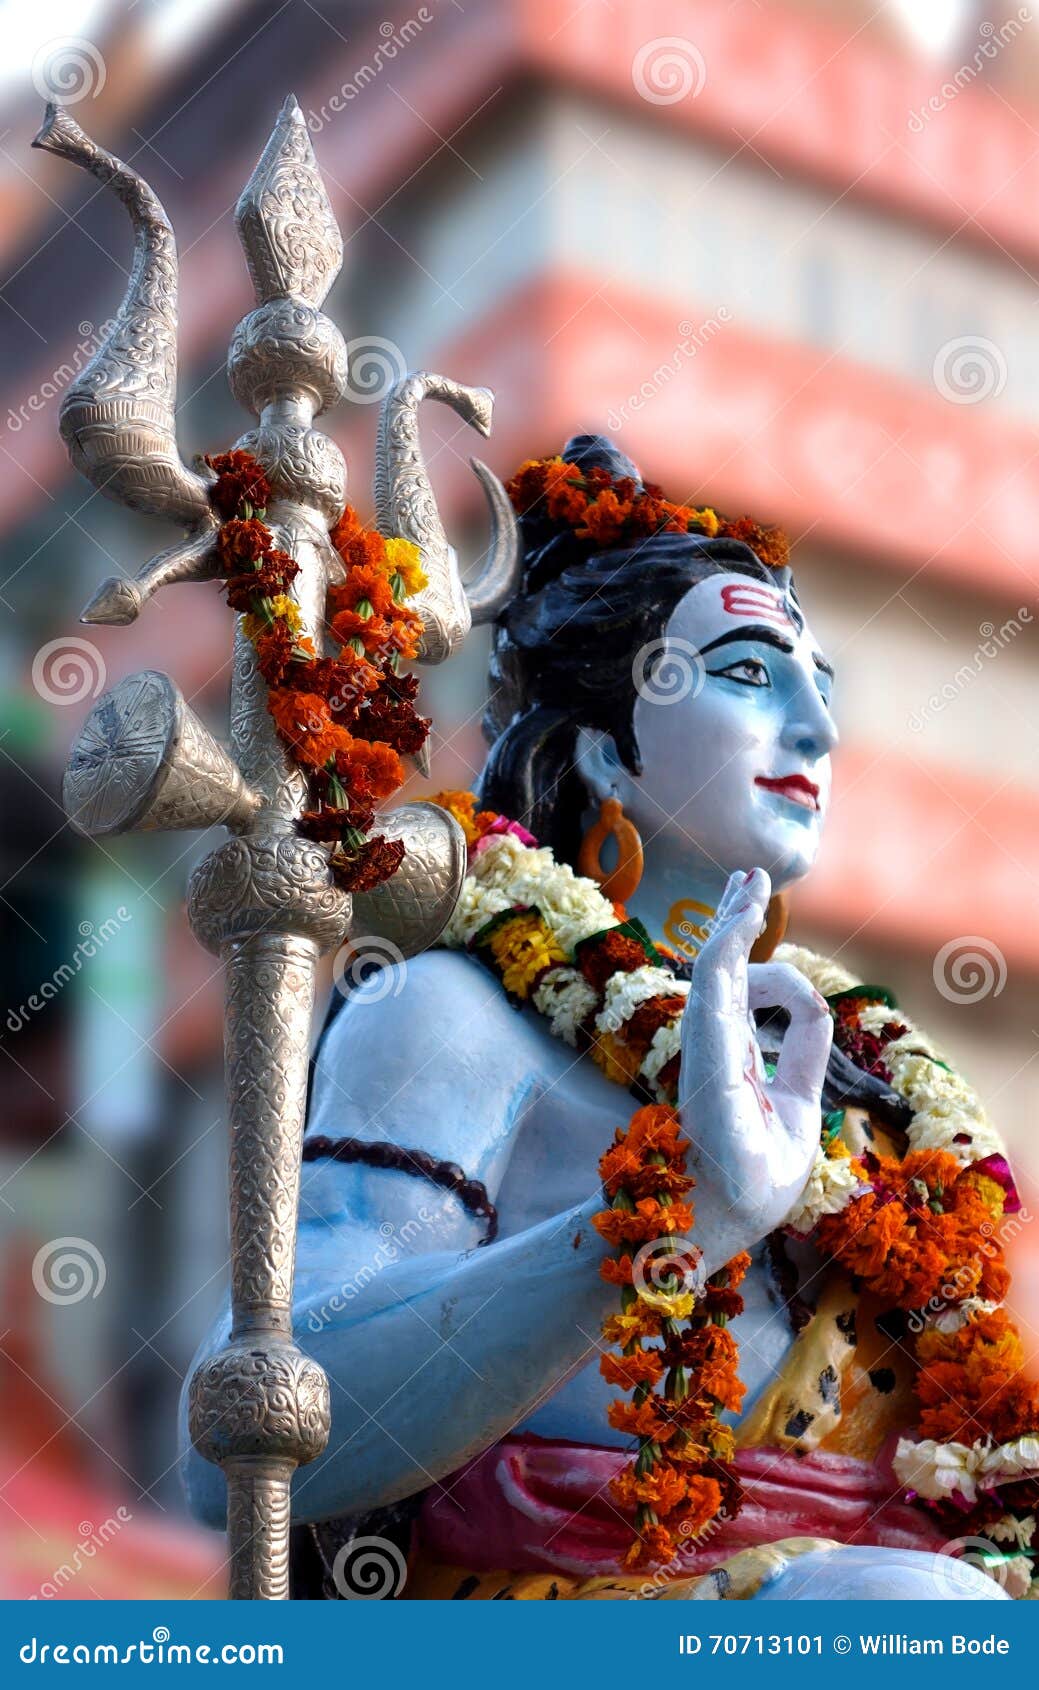 Portrait of Shiva Statue with Flowers Stock Image - Image of mudra ...